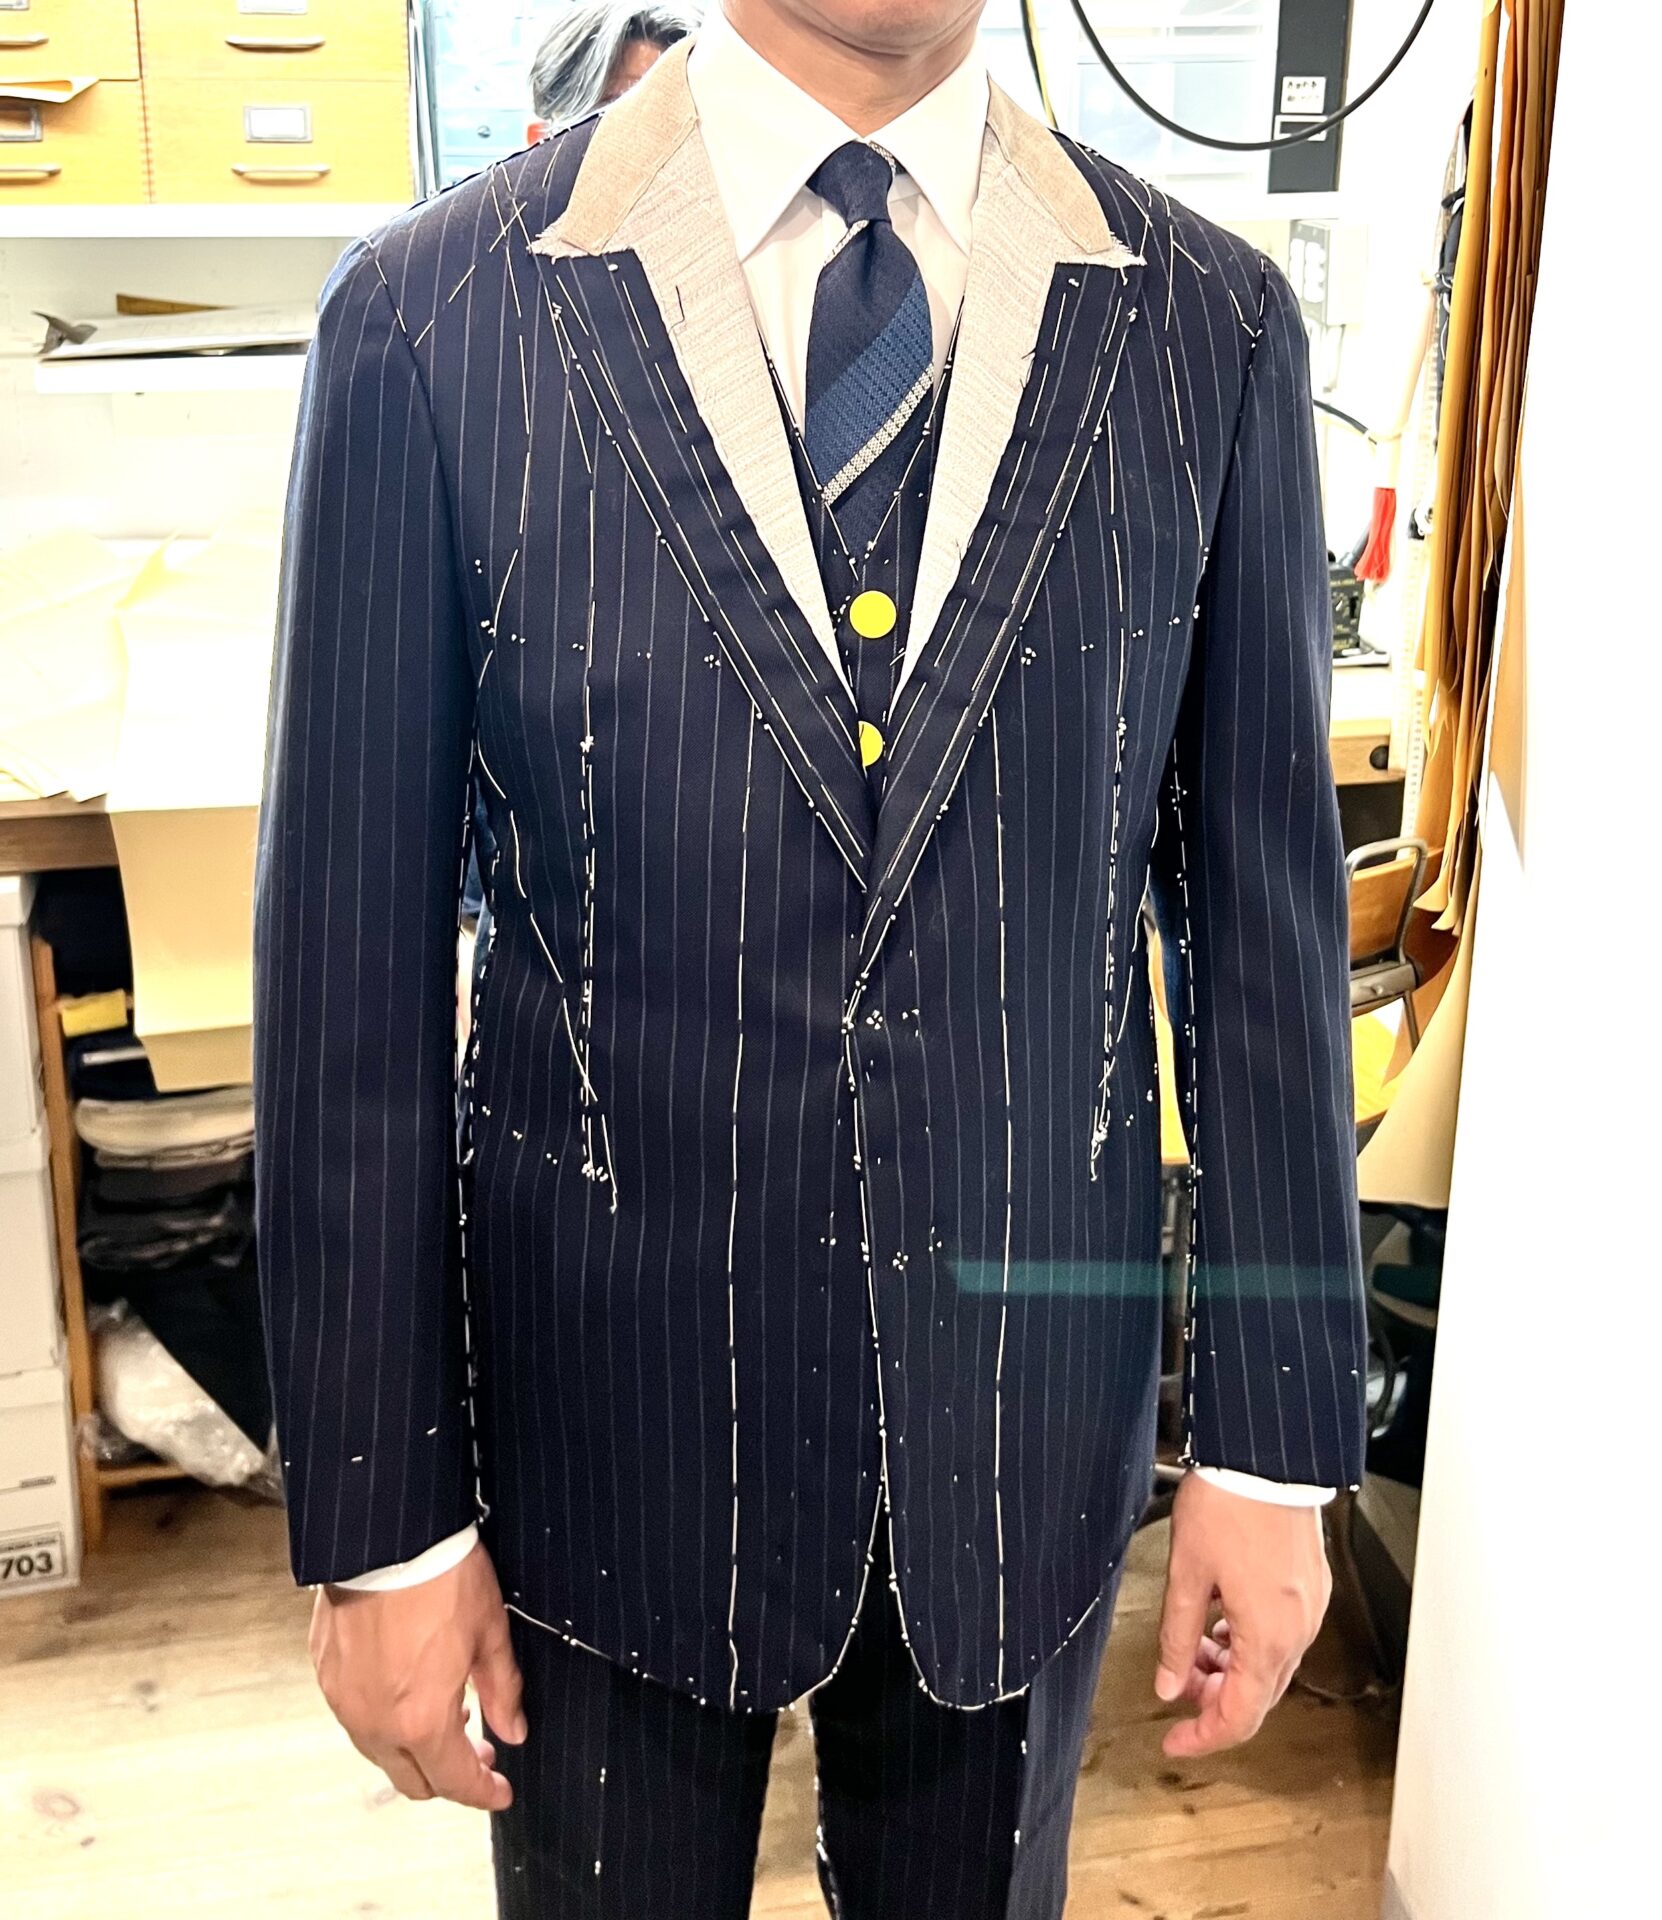 Bespoke Couture by Ozwald Boateng 38 スーツ - セットアップ